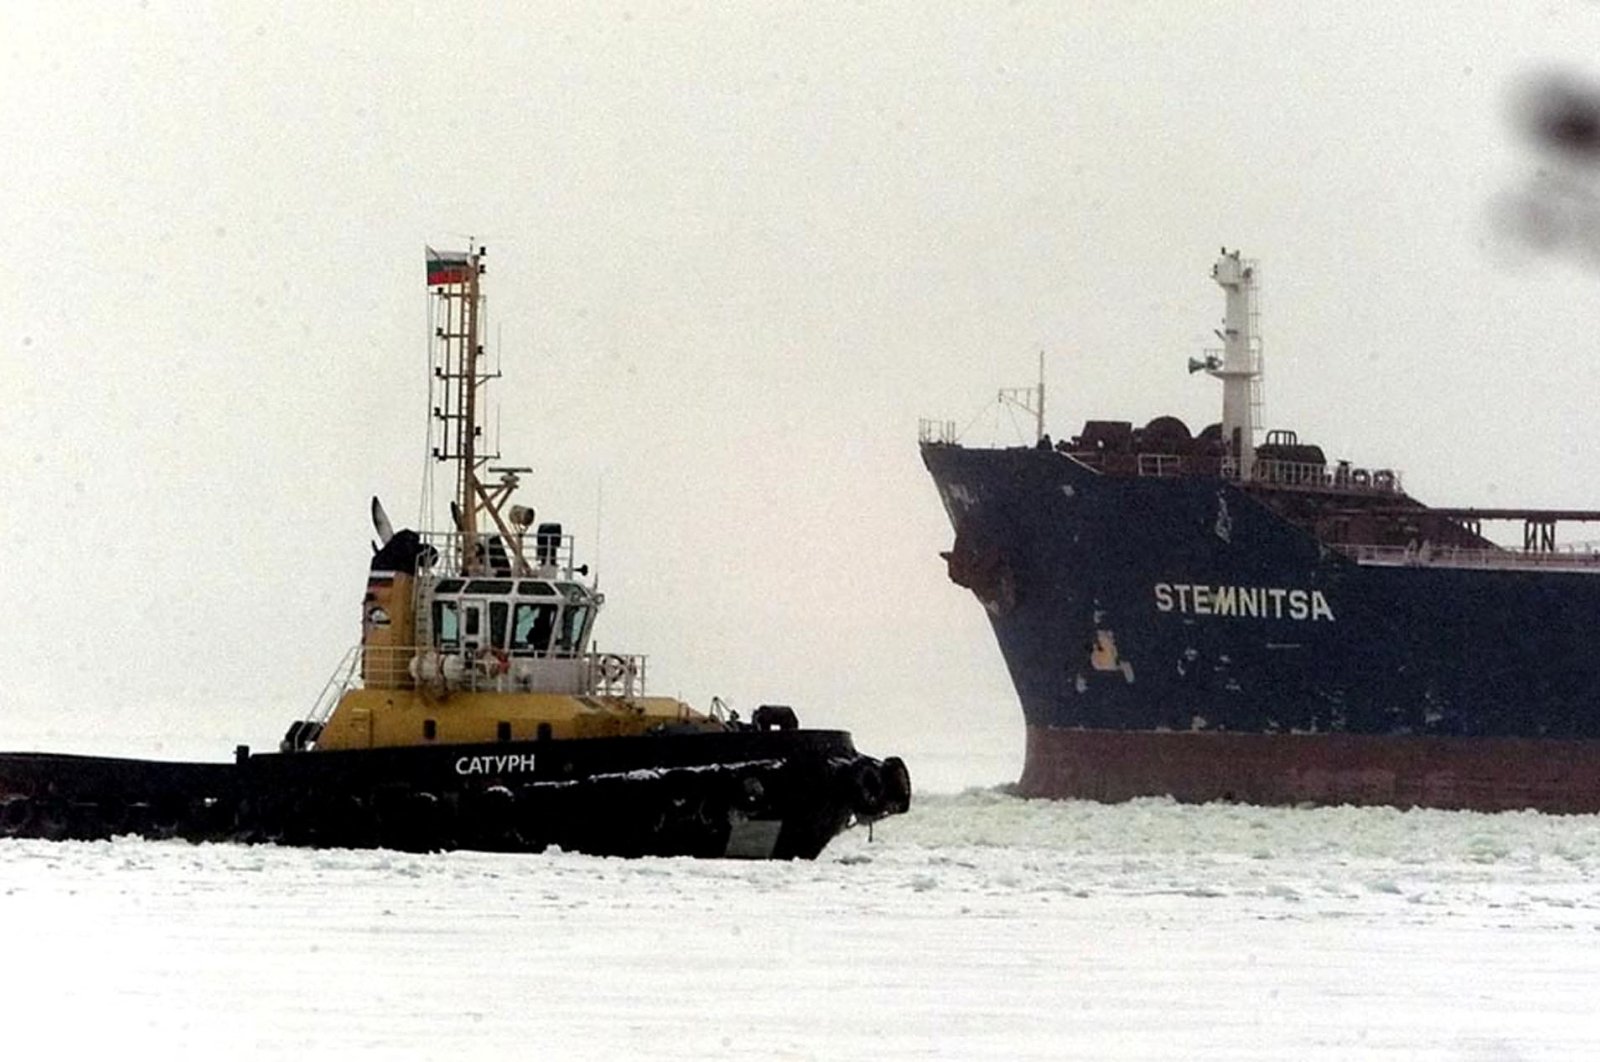 The Greek-registered ship Stemnitsa (R) with 100,000 tons of crude oil on board leaves the Russian port of Primorsk, Feb. 5, 2003. (Reuters File Photo)